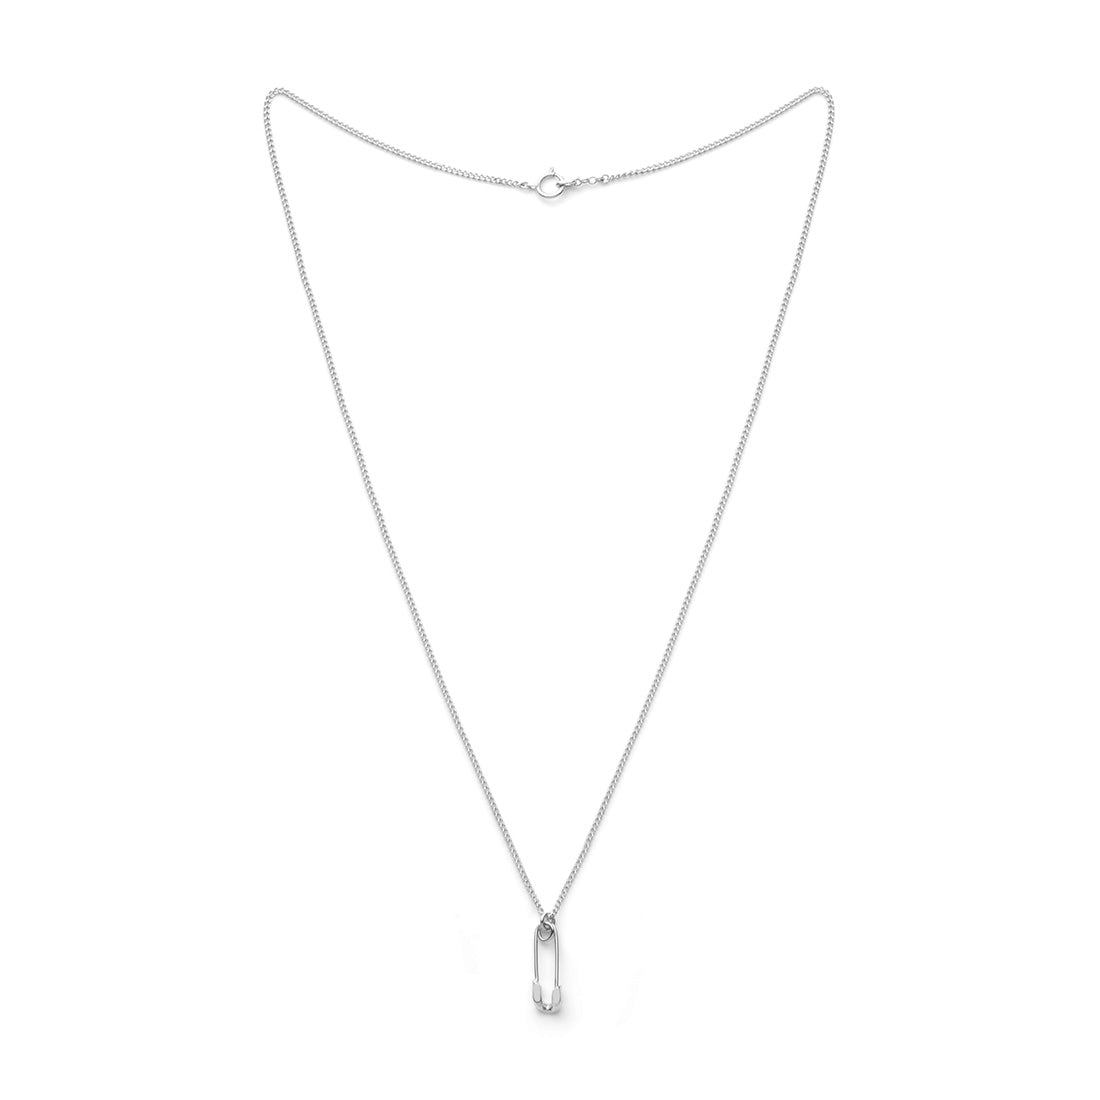 18K　Safety Pin　Necklace　ネックレス　ホワイトゴールド